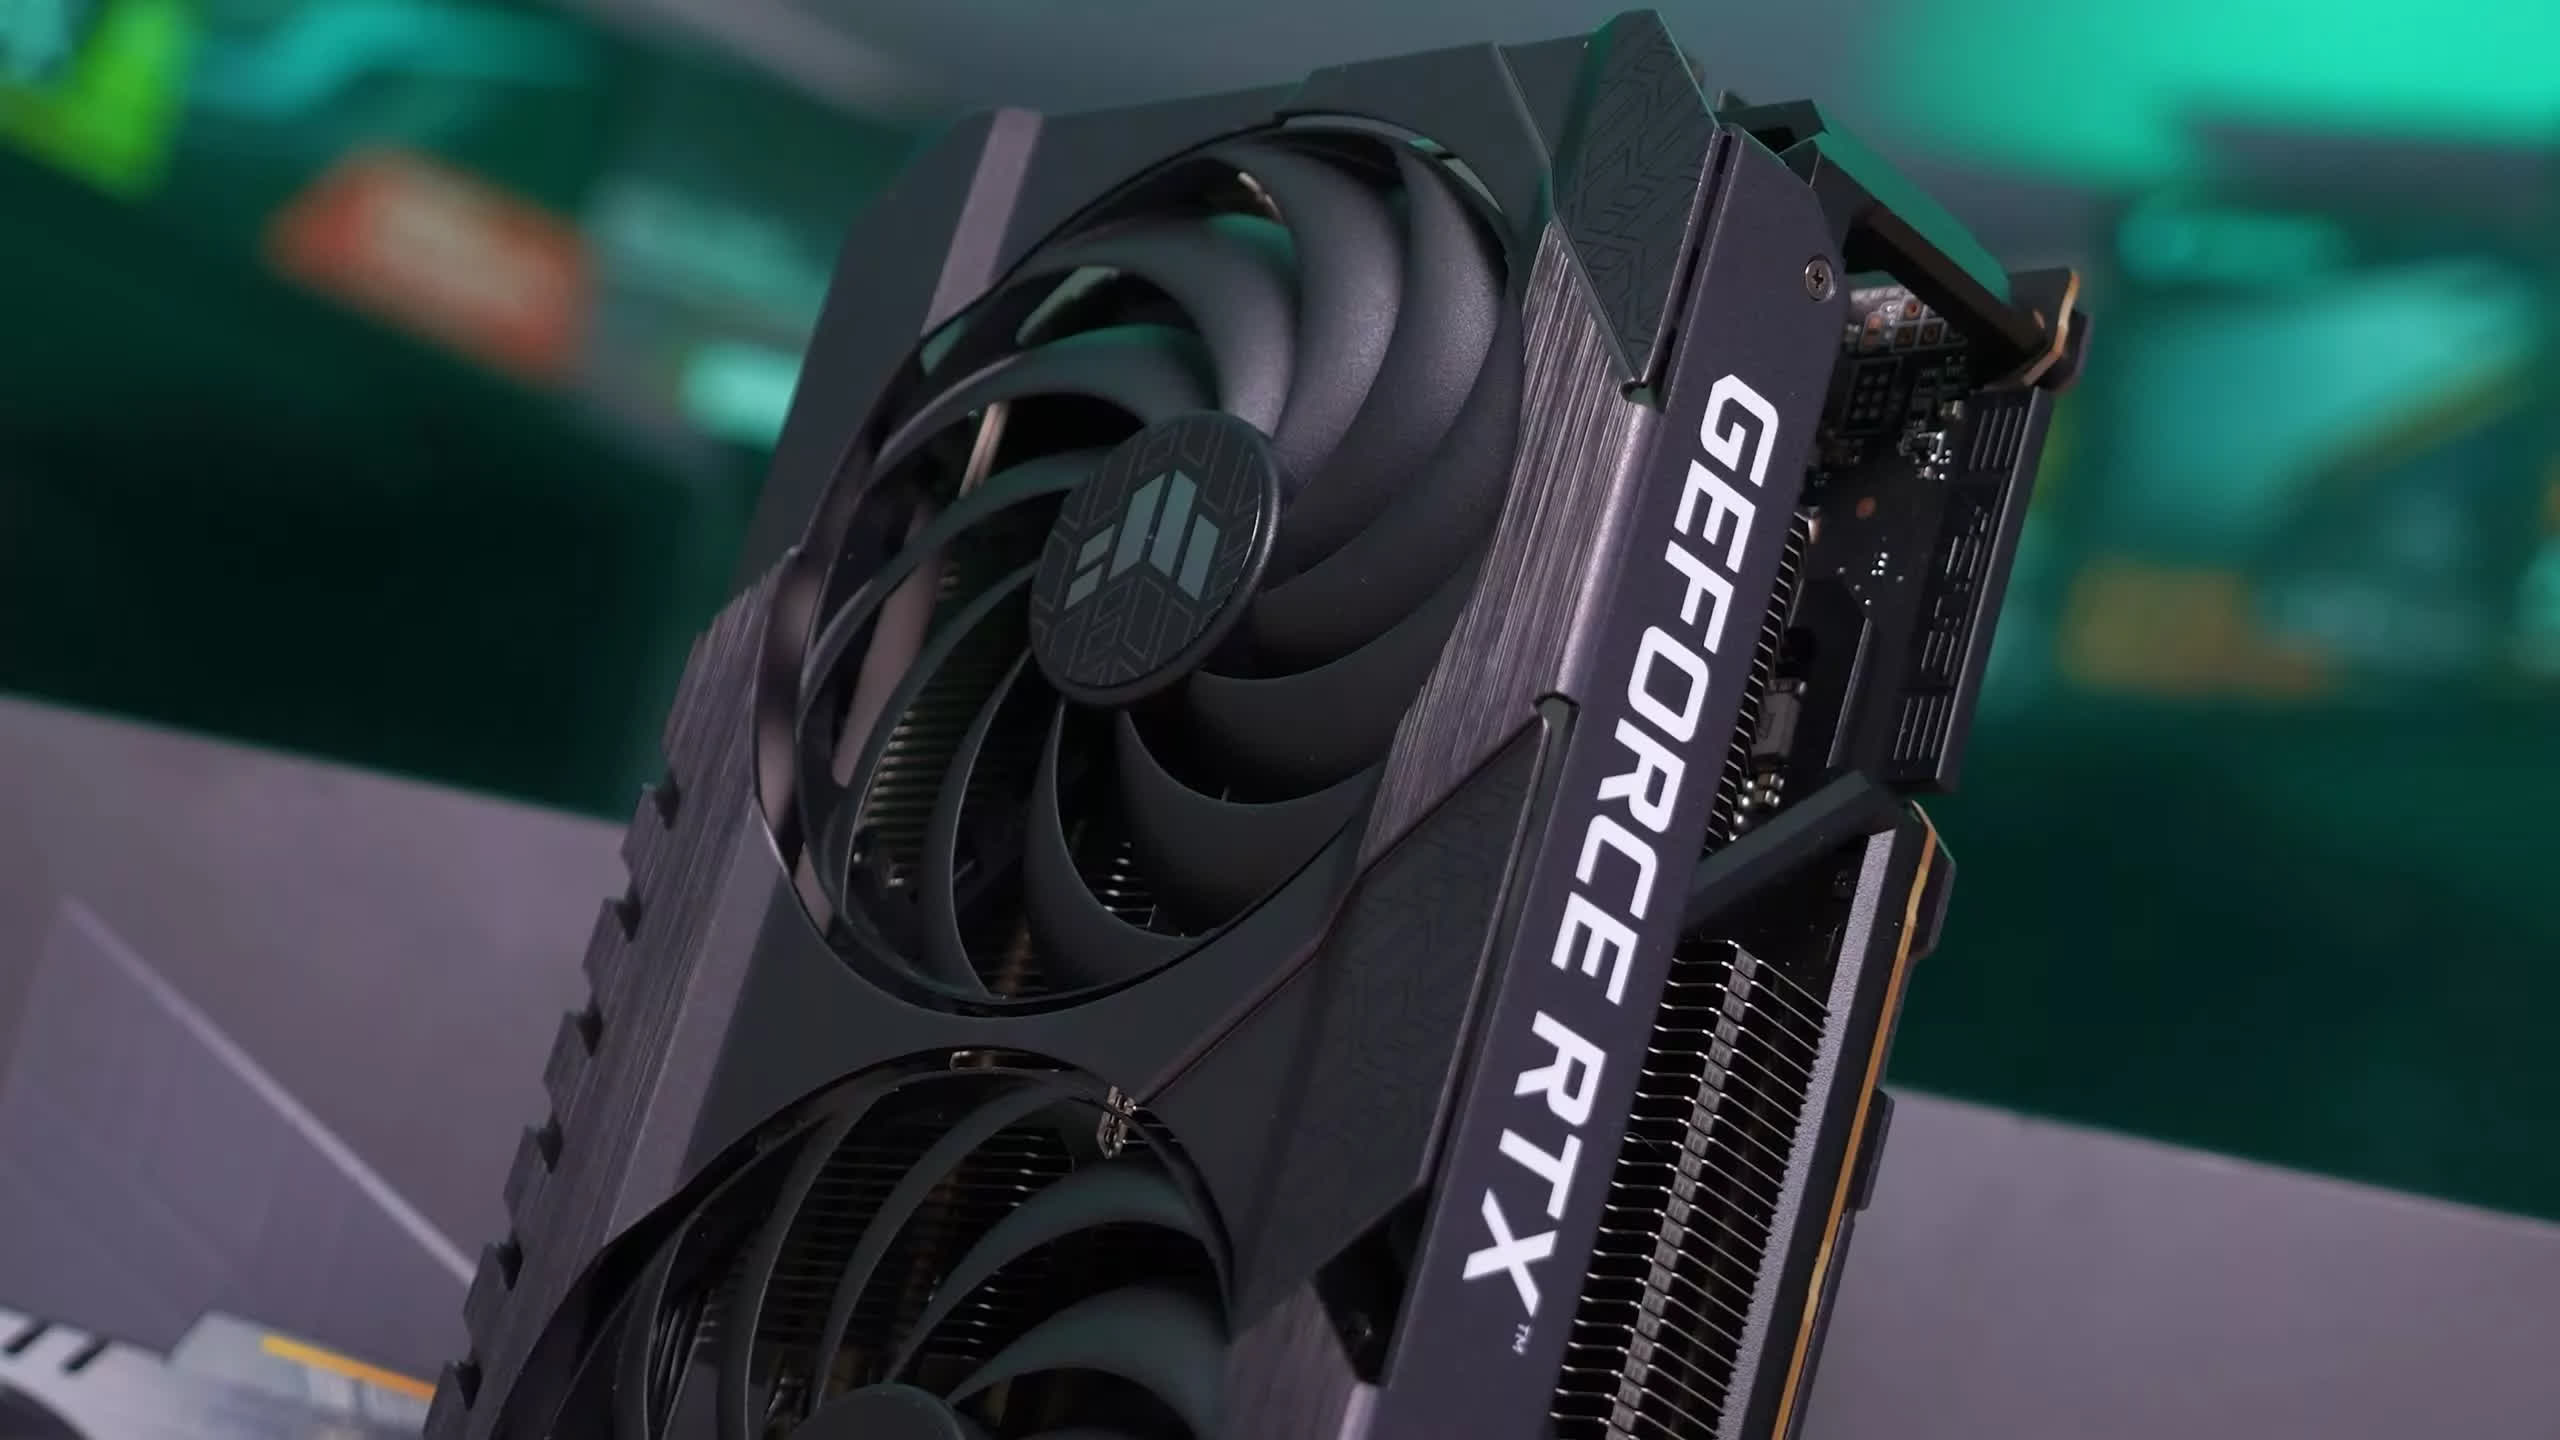 GPU tariff exemption expires December 31, possibly increasing graphics card prices